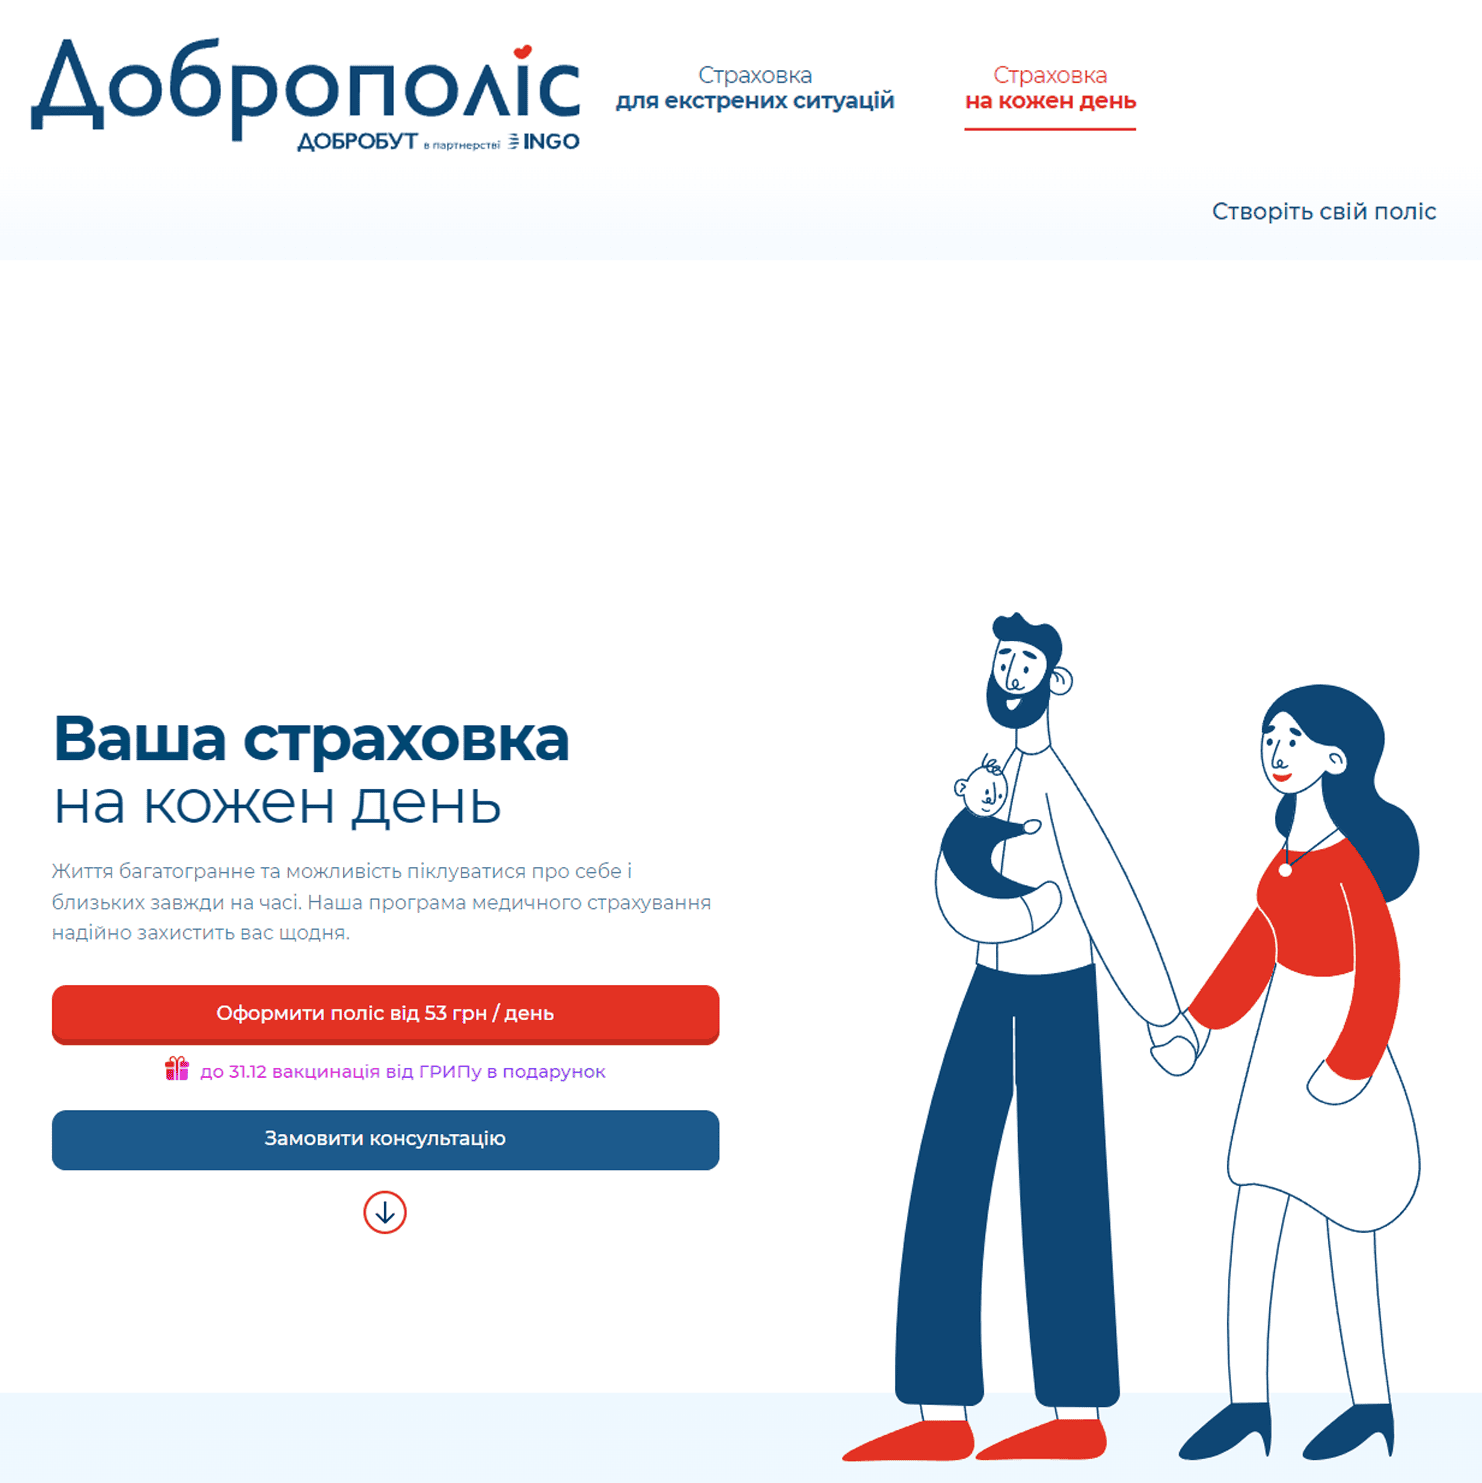 New extended health insurance program «Dobropolis for Every Day»